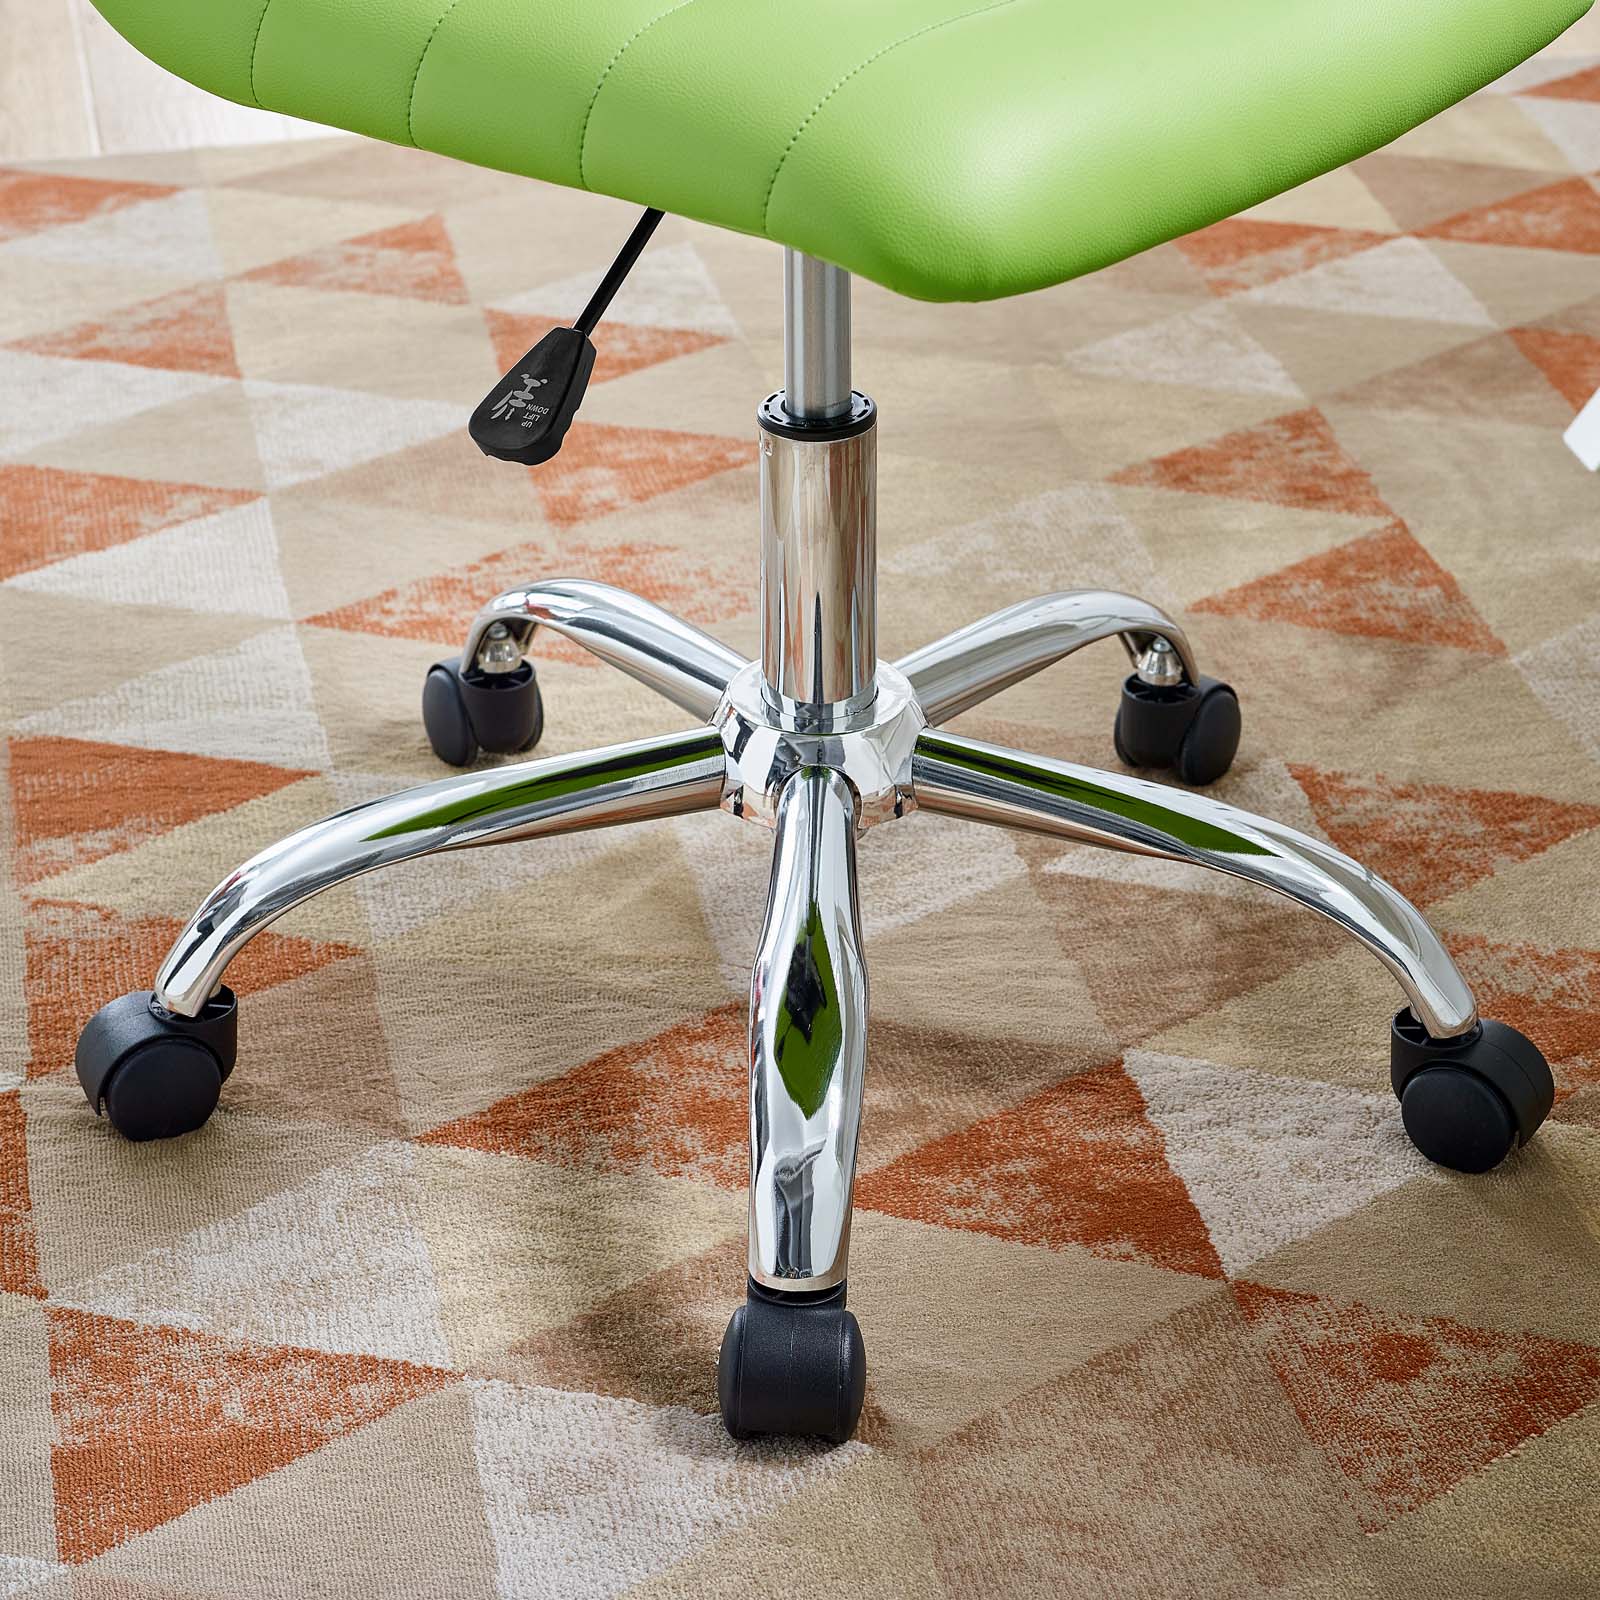 Modway Task Chairs - Ripple Armless Mid Back Vinyl Office Chair Bright Green